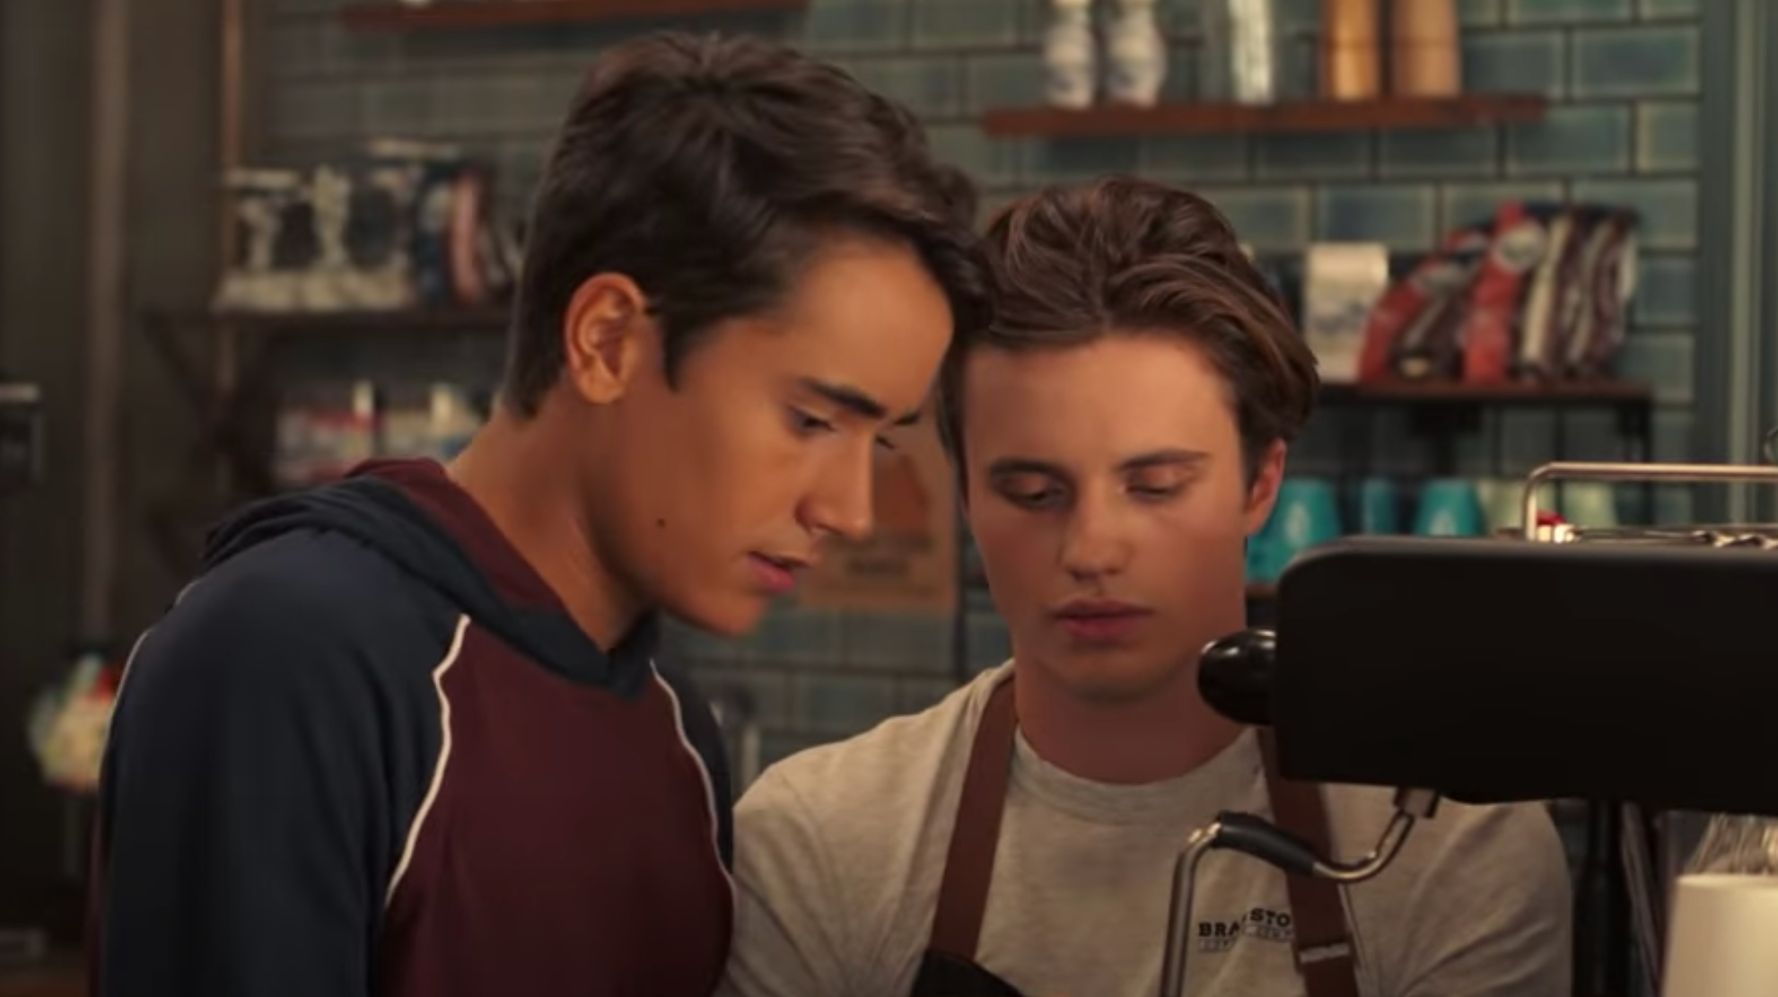 Hulu Teases 'Love, Victor' With A Flirty Gay Barista Exchange.